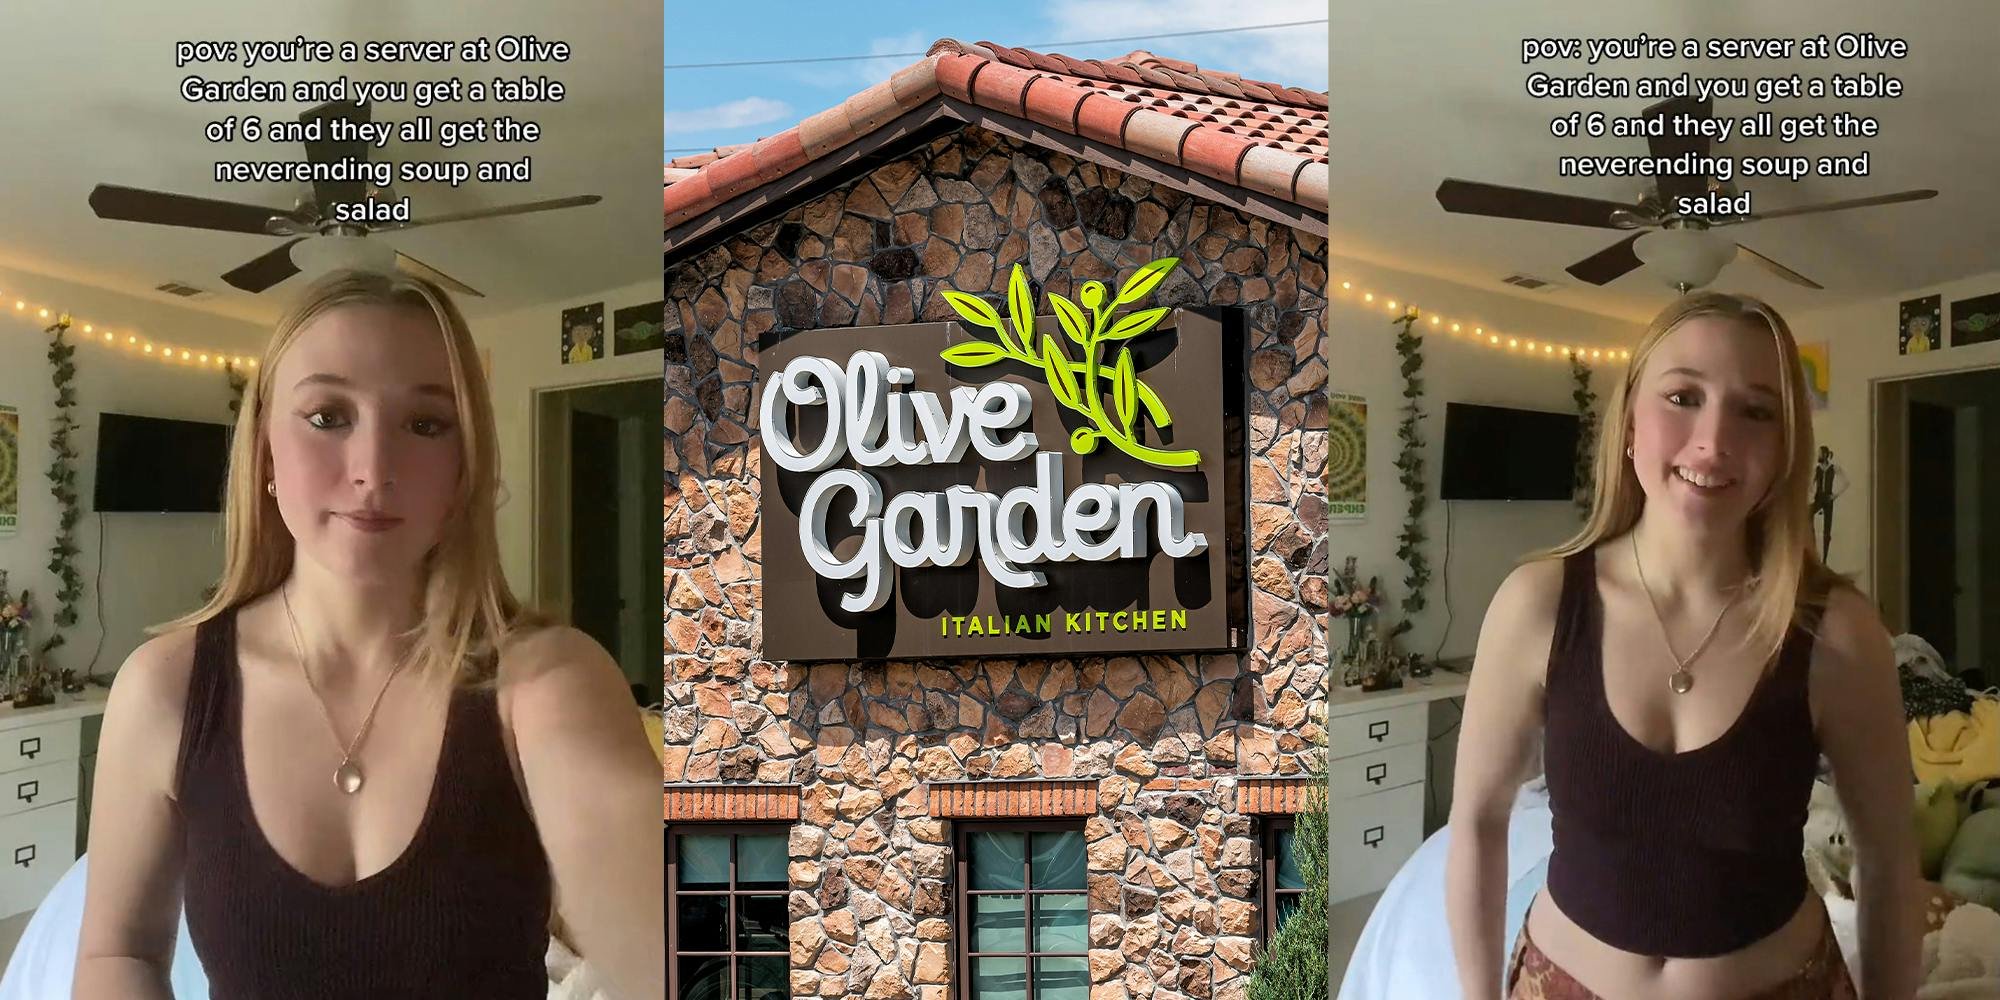 'I'm sorry I'm very broke': Olive Garden worker complains about when tables of 6 or more all order never-ending soup and salad